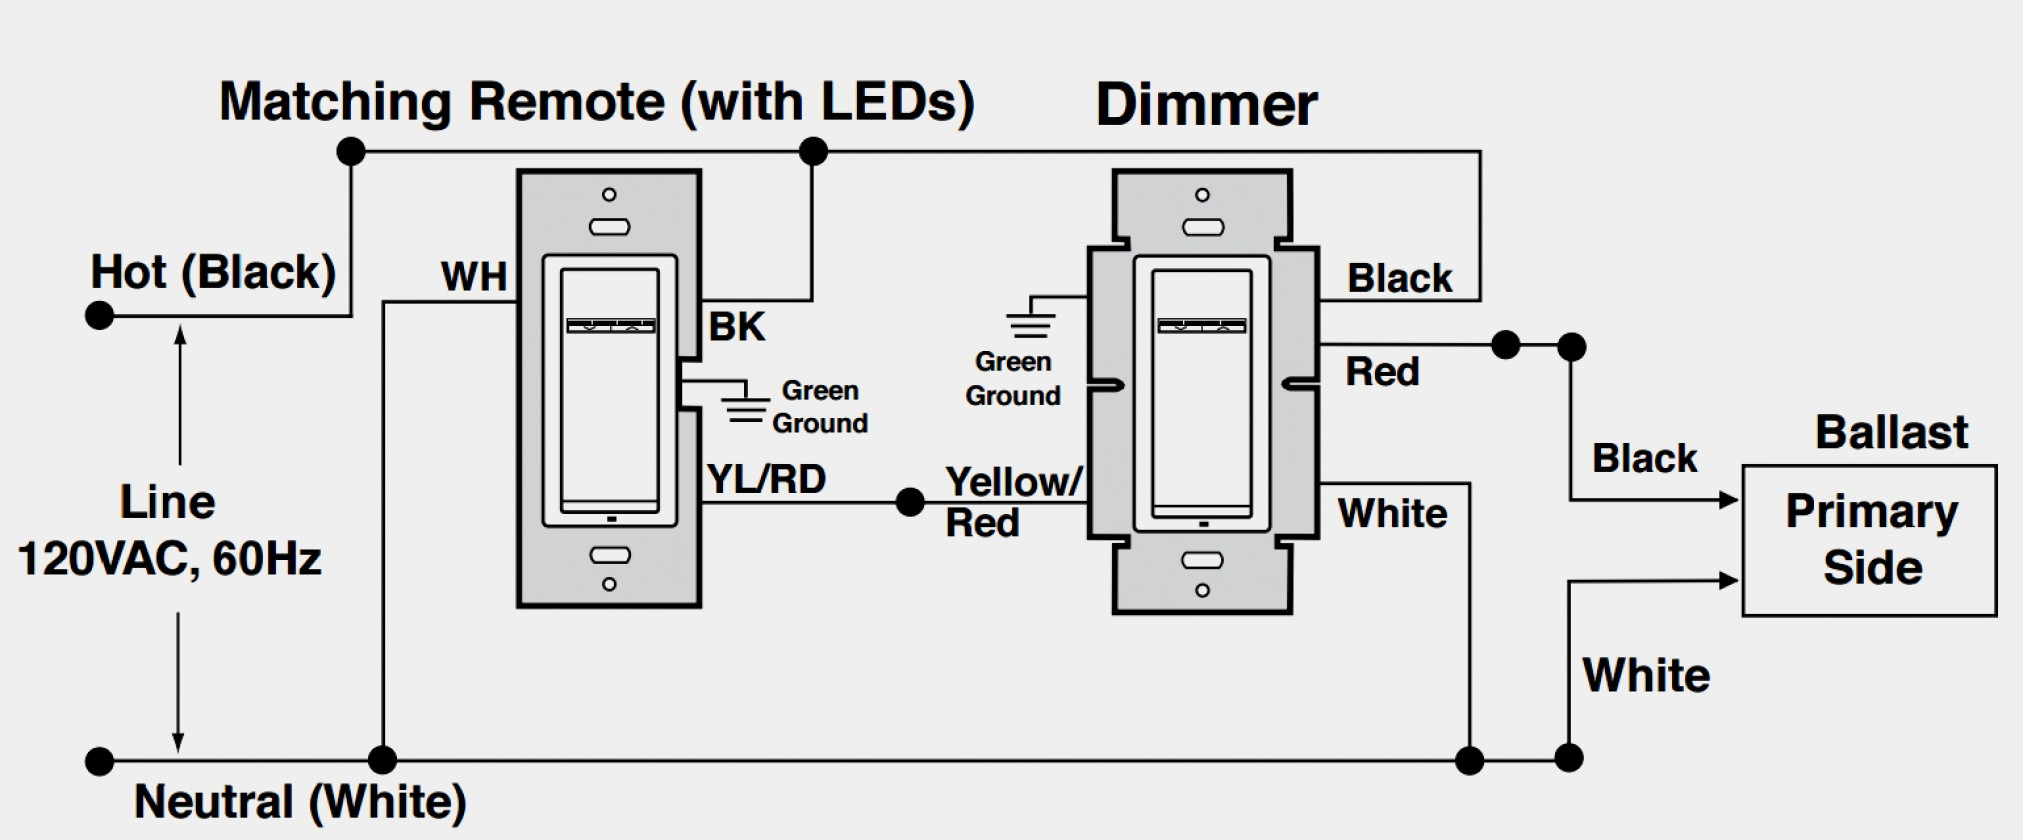 Lutron Led Dimmer Switch Wiring Diagram - Wiring Diagrams - Dimming Switch Wiring Diagram